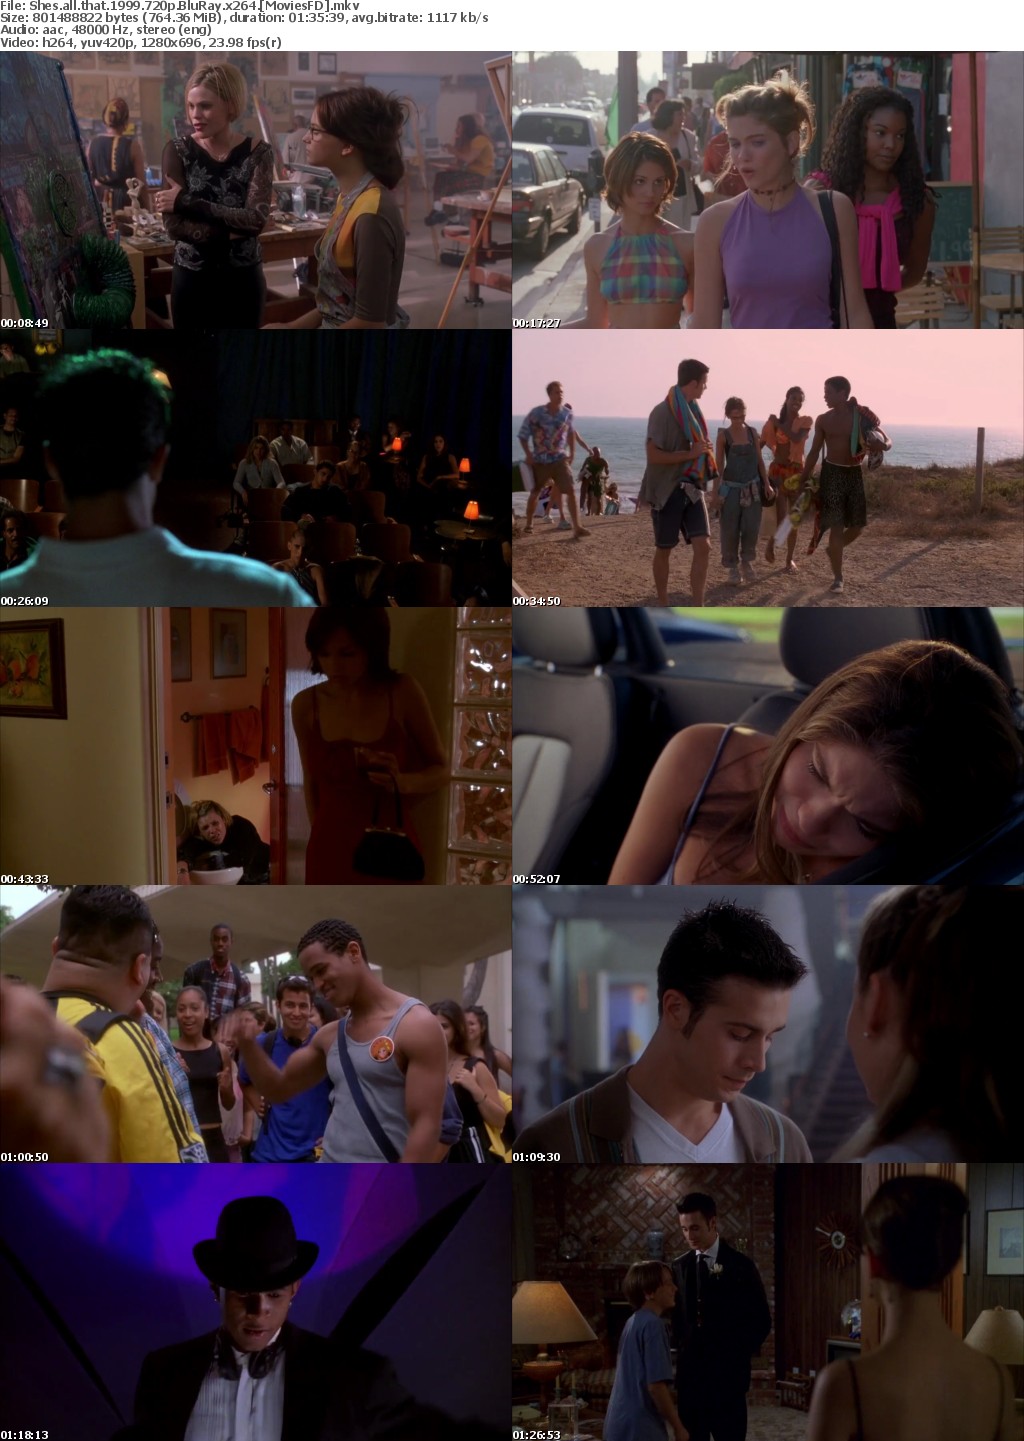 Shes All That (1999) 720P Bluray X264 Moviesfd